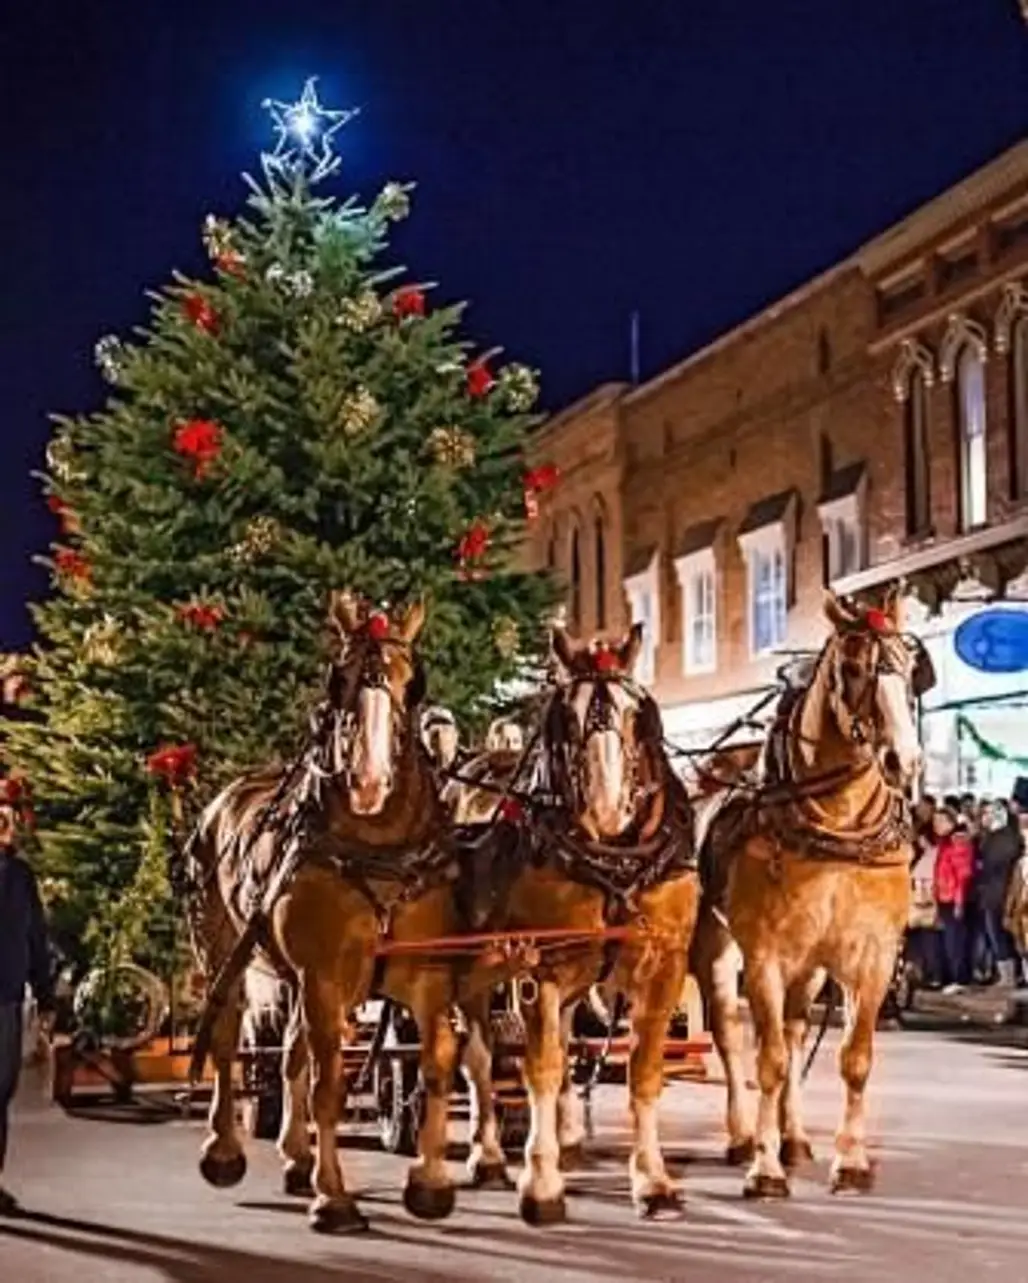 Enjoy an Old-fashioned Christmas in Manistee, USA